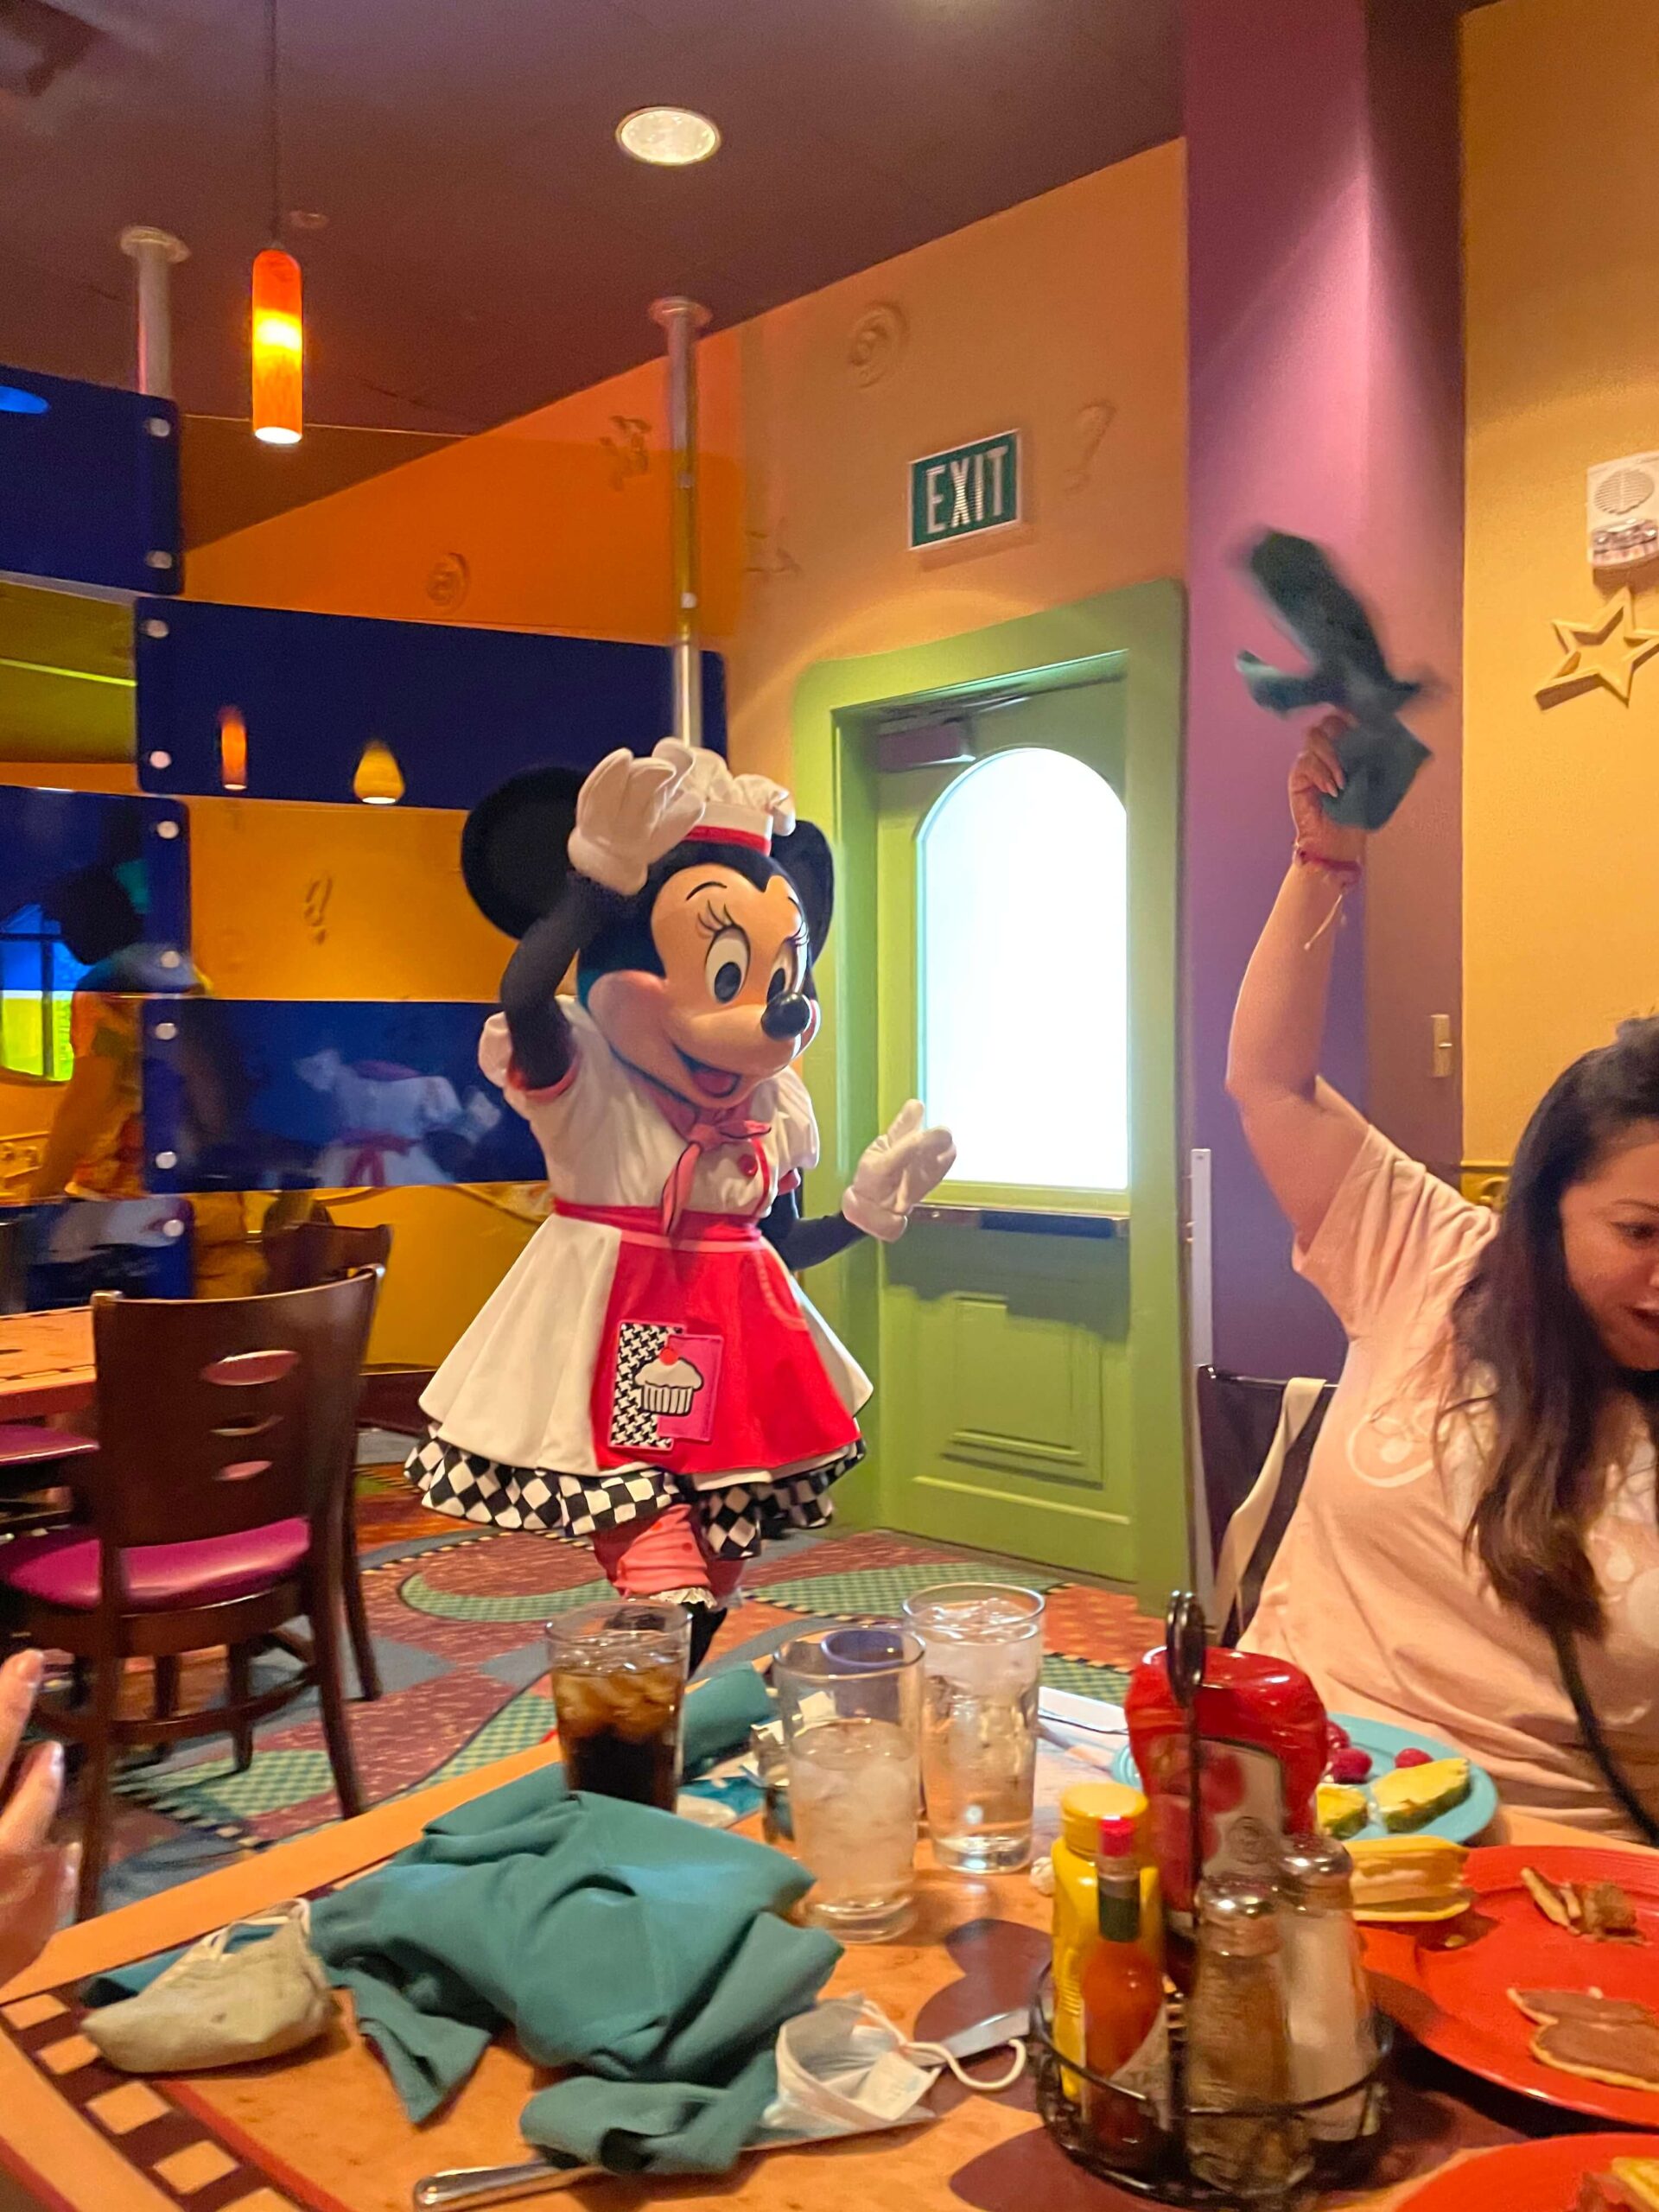 minnie mouse dancing at goofy's kitchen character dining at the disneyland hotel